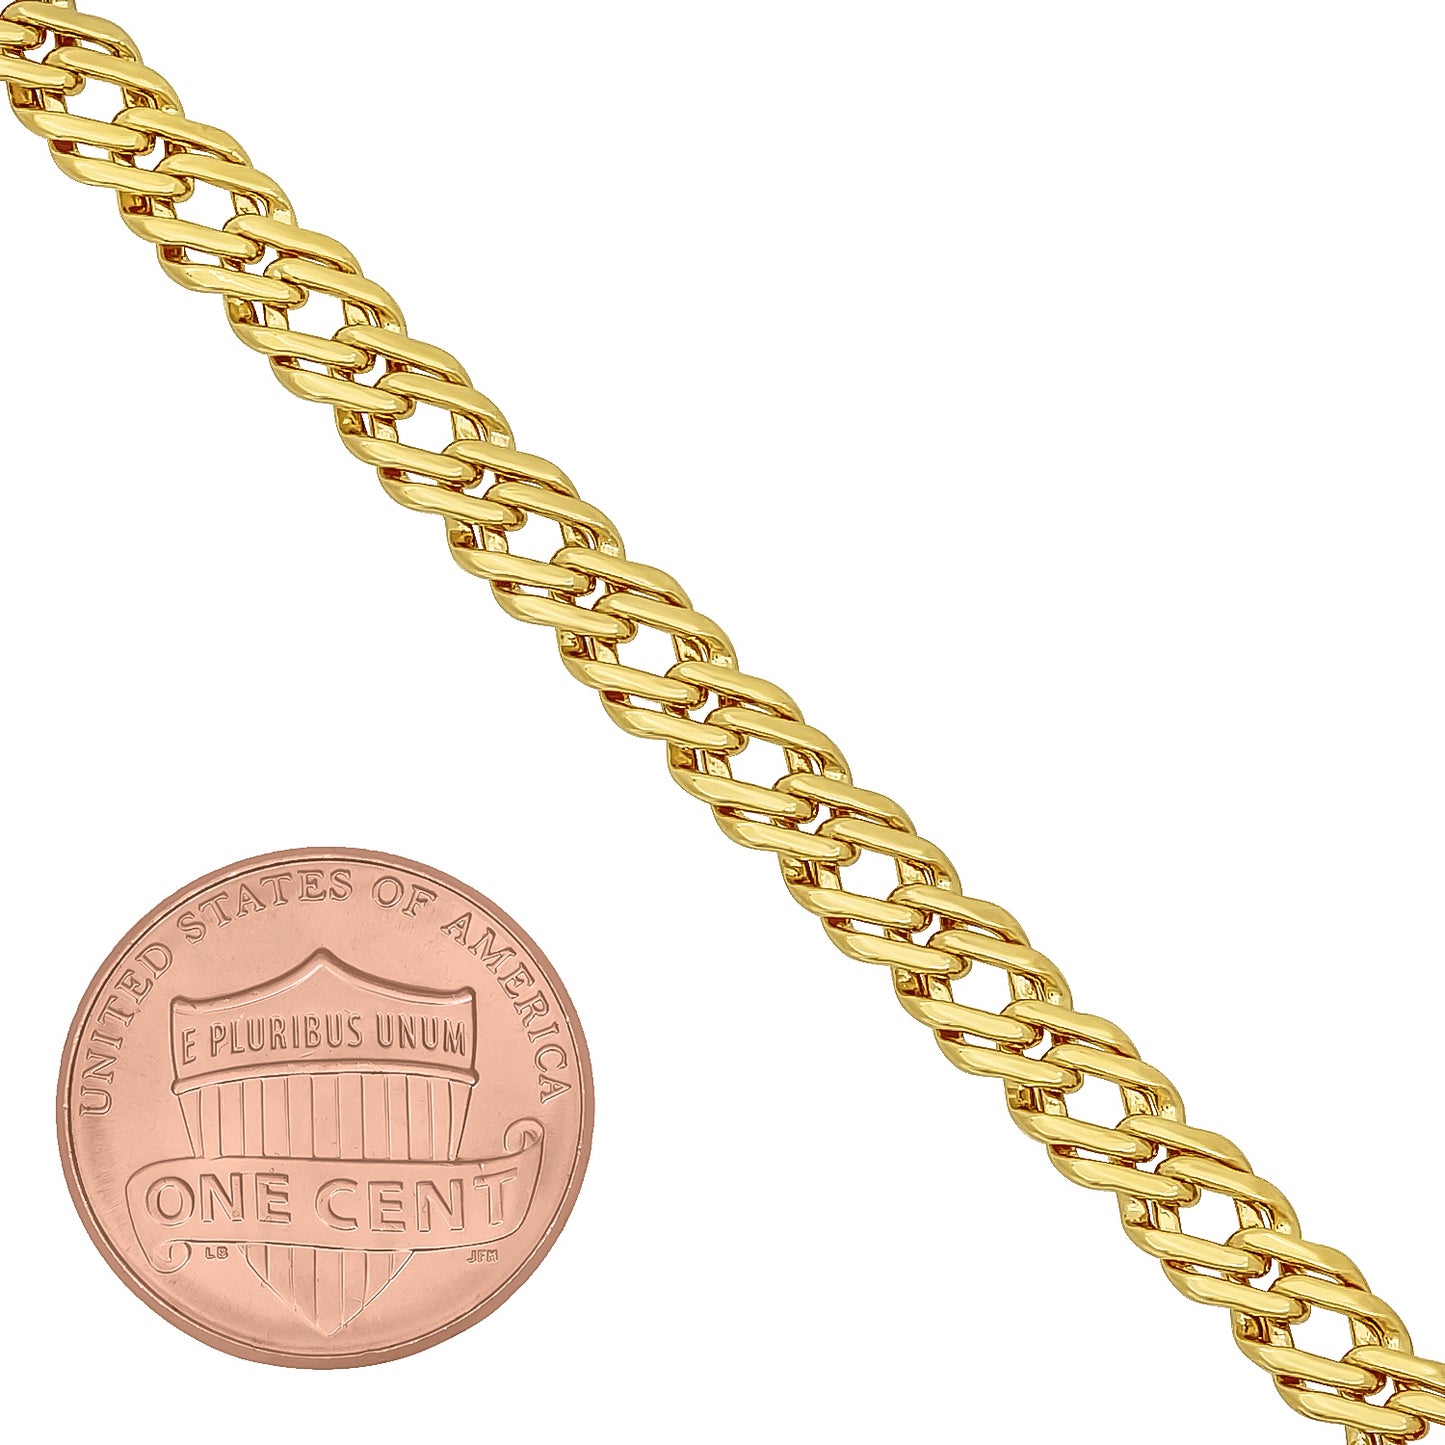 5mm 14k Yellow Gold Plated Cable Venetian Chain Bracelet + Gift Box (SKU: GL-061AB-BX)